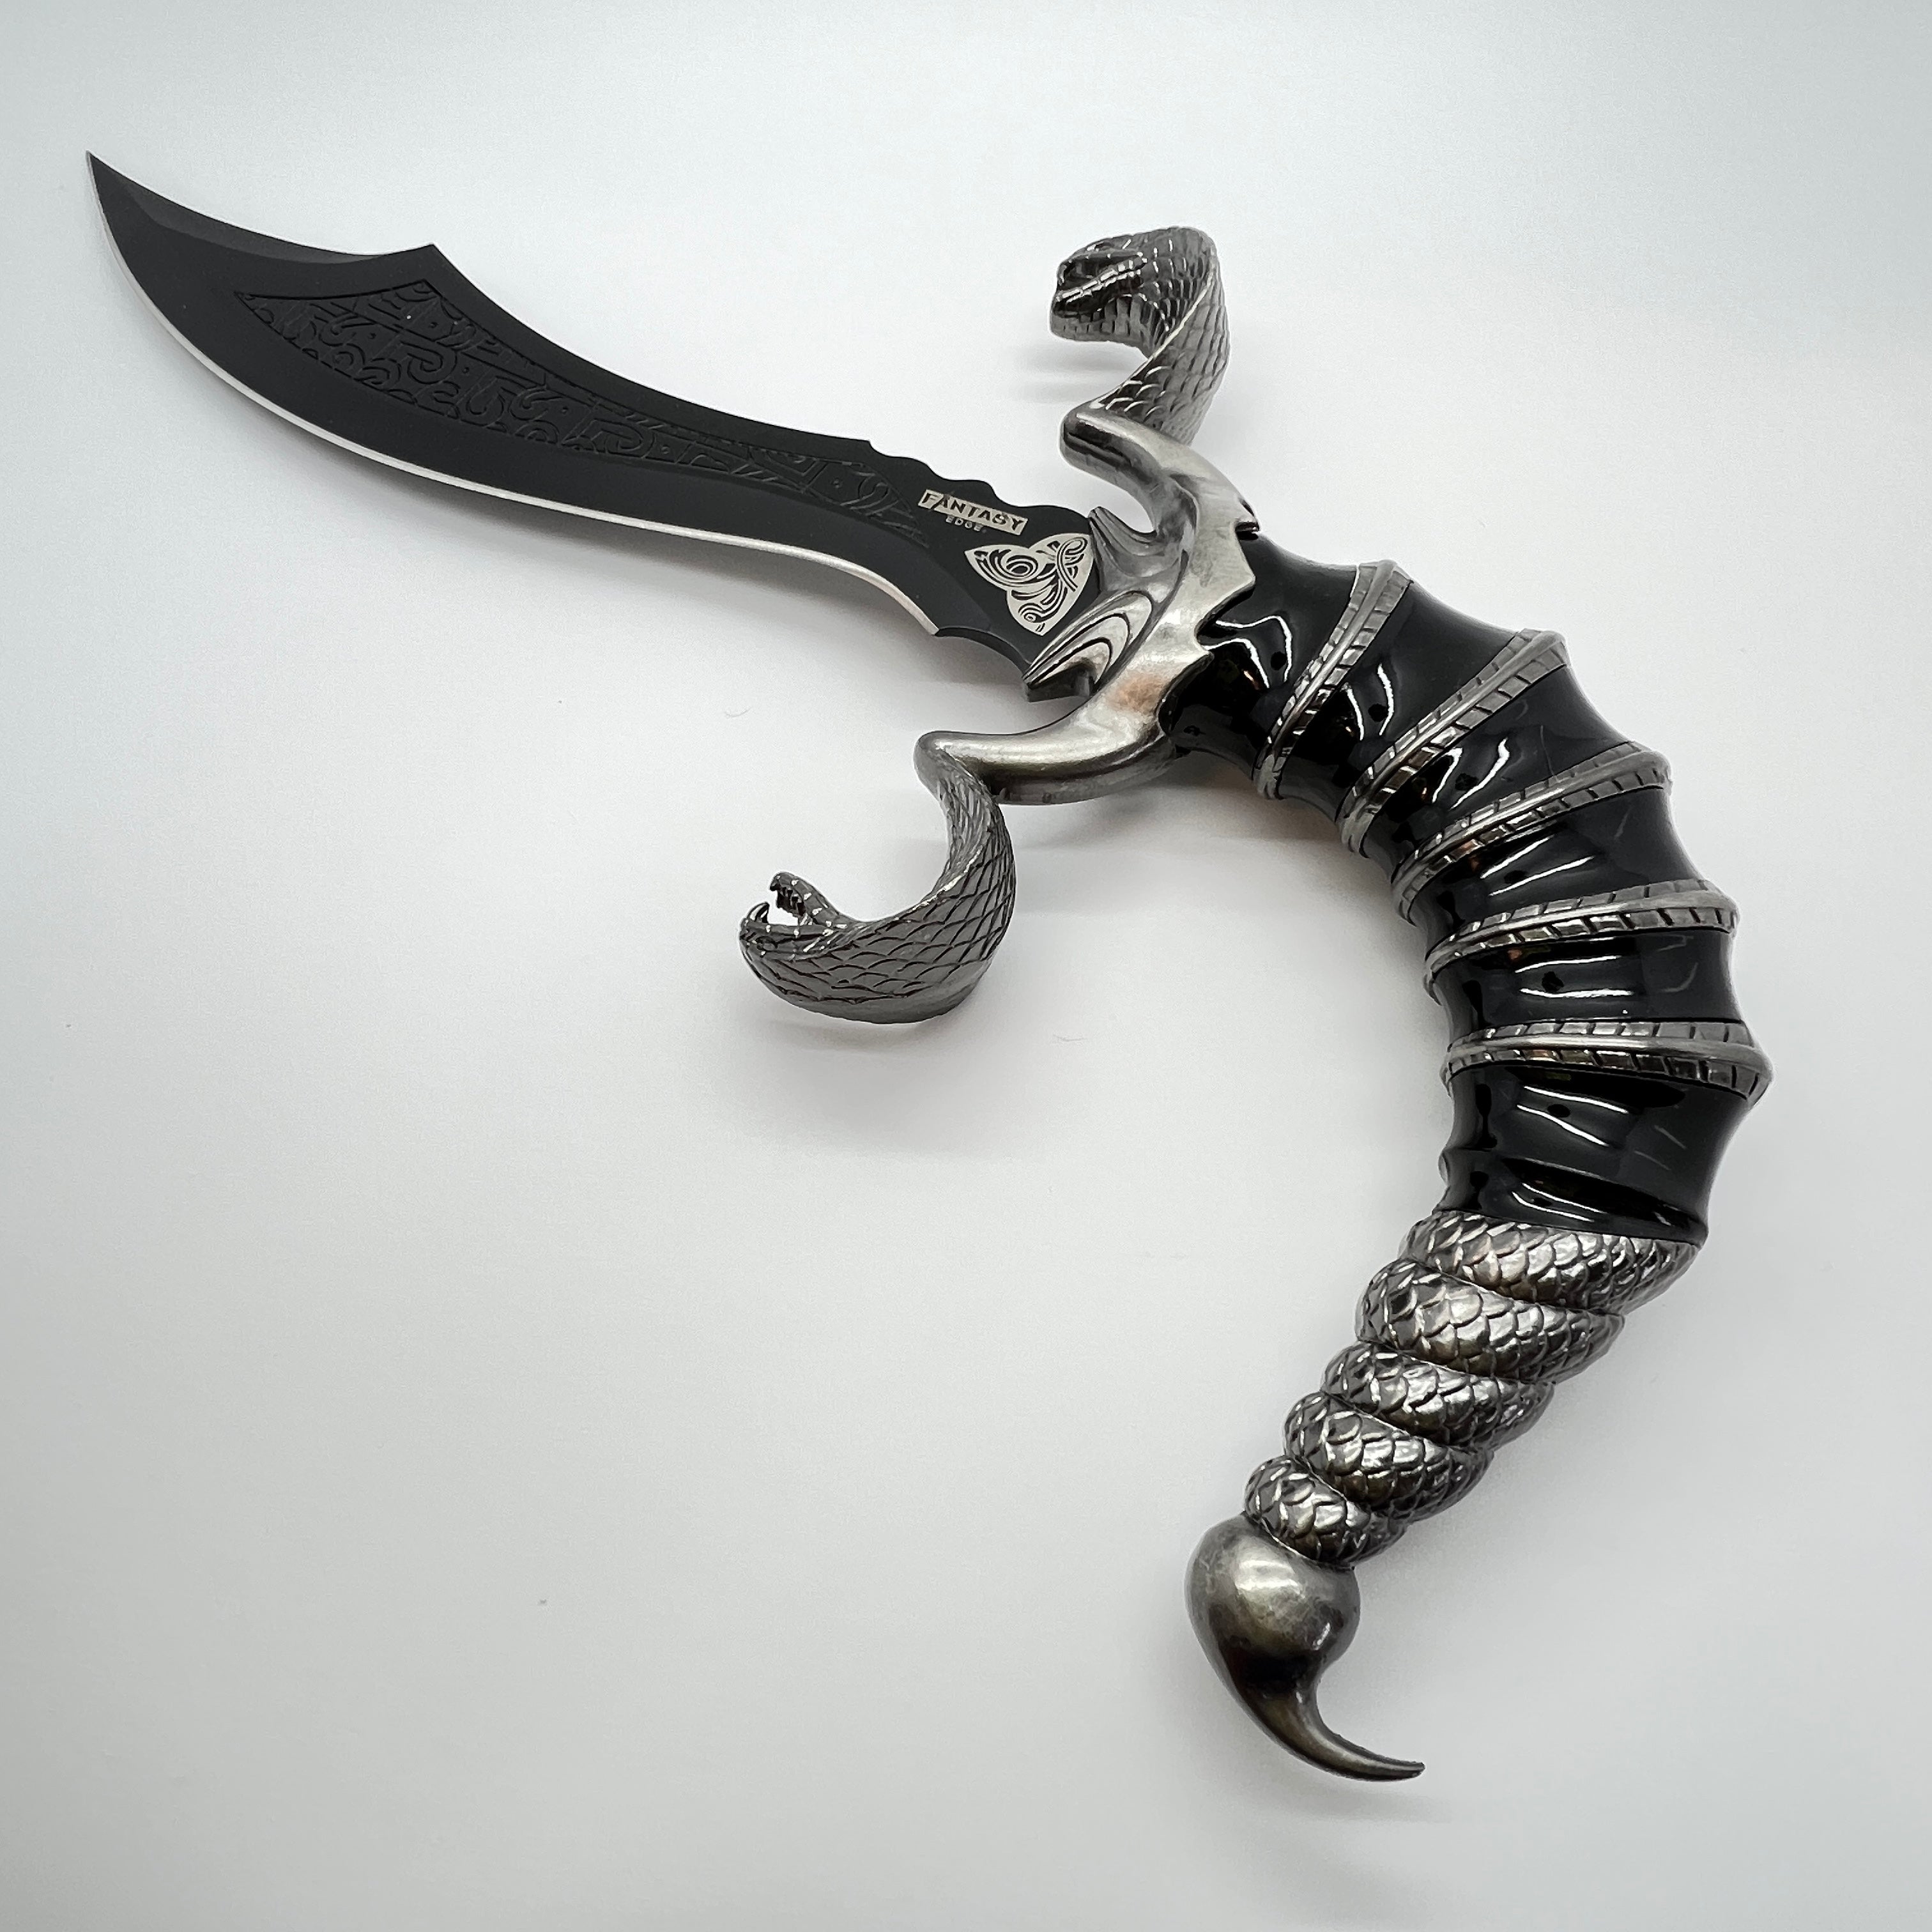 Scorpion King Slayer Dagger - Blades For Babes Fixed Blade